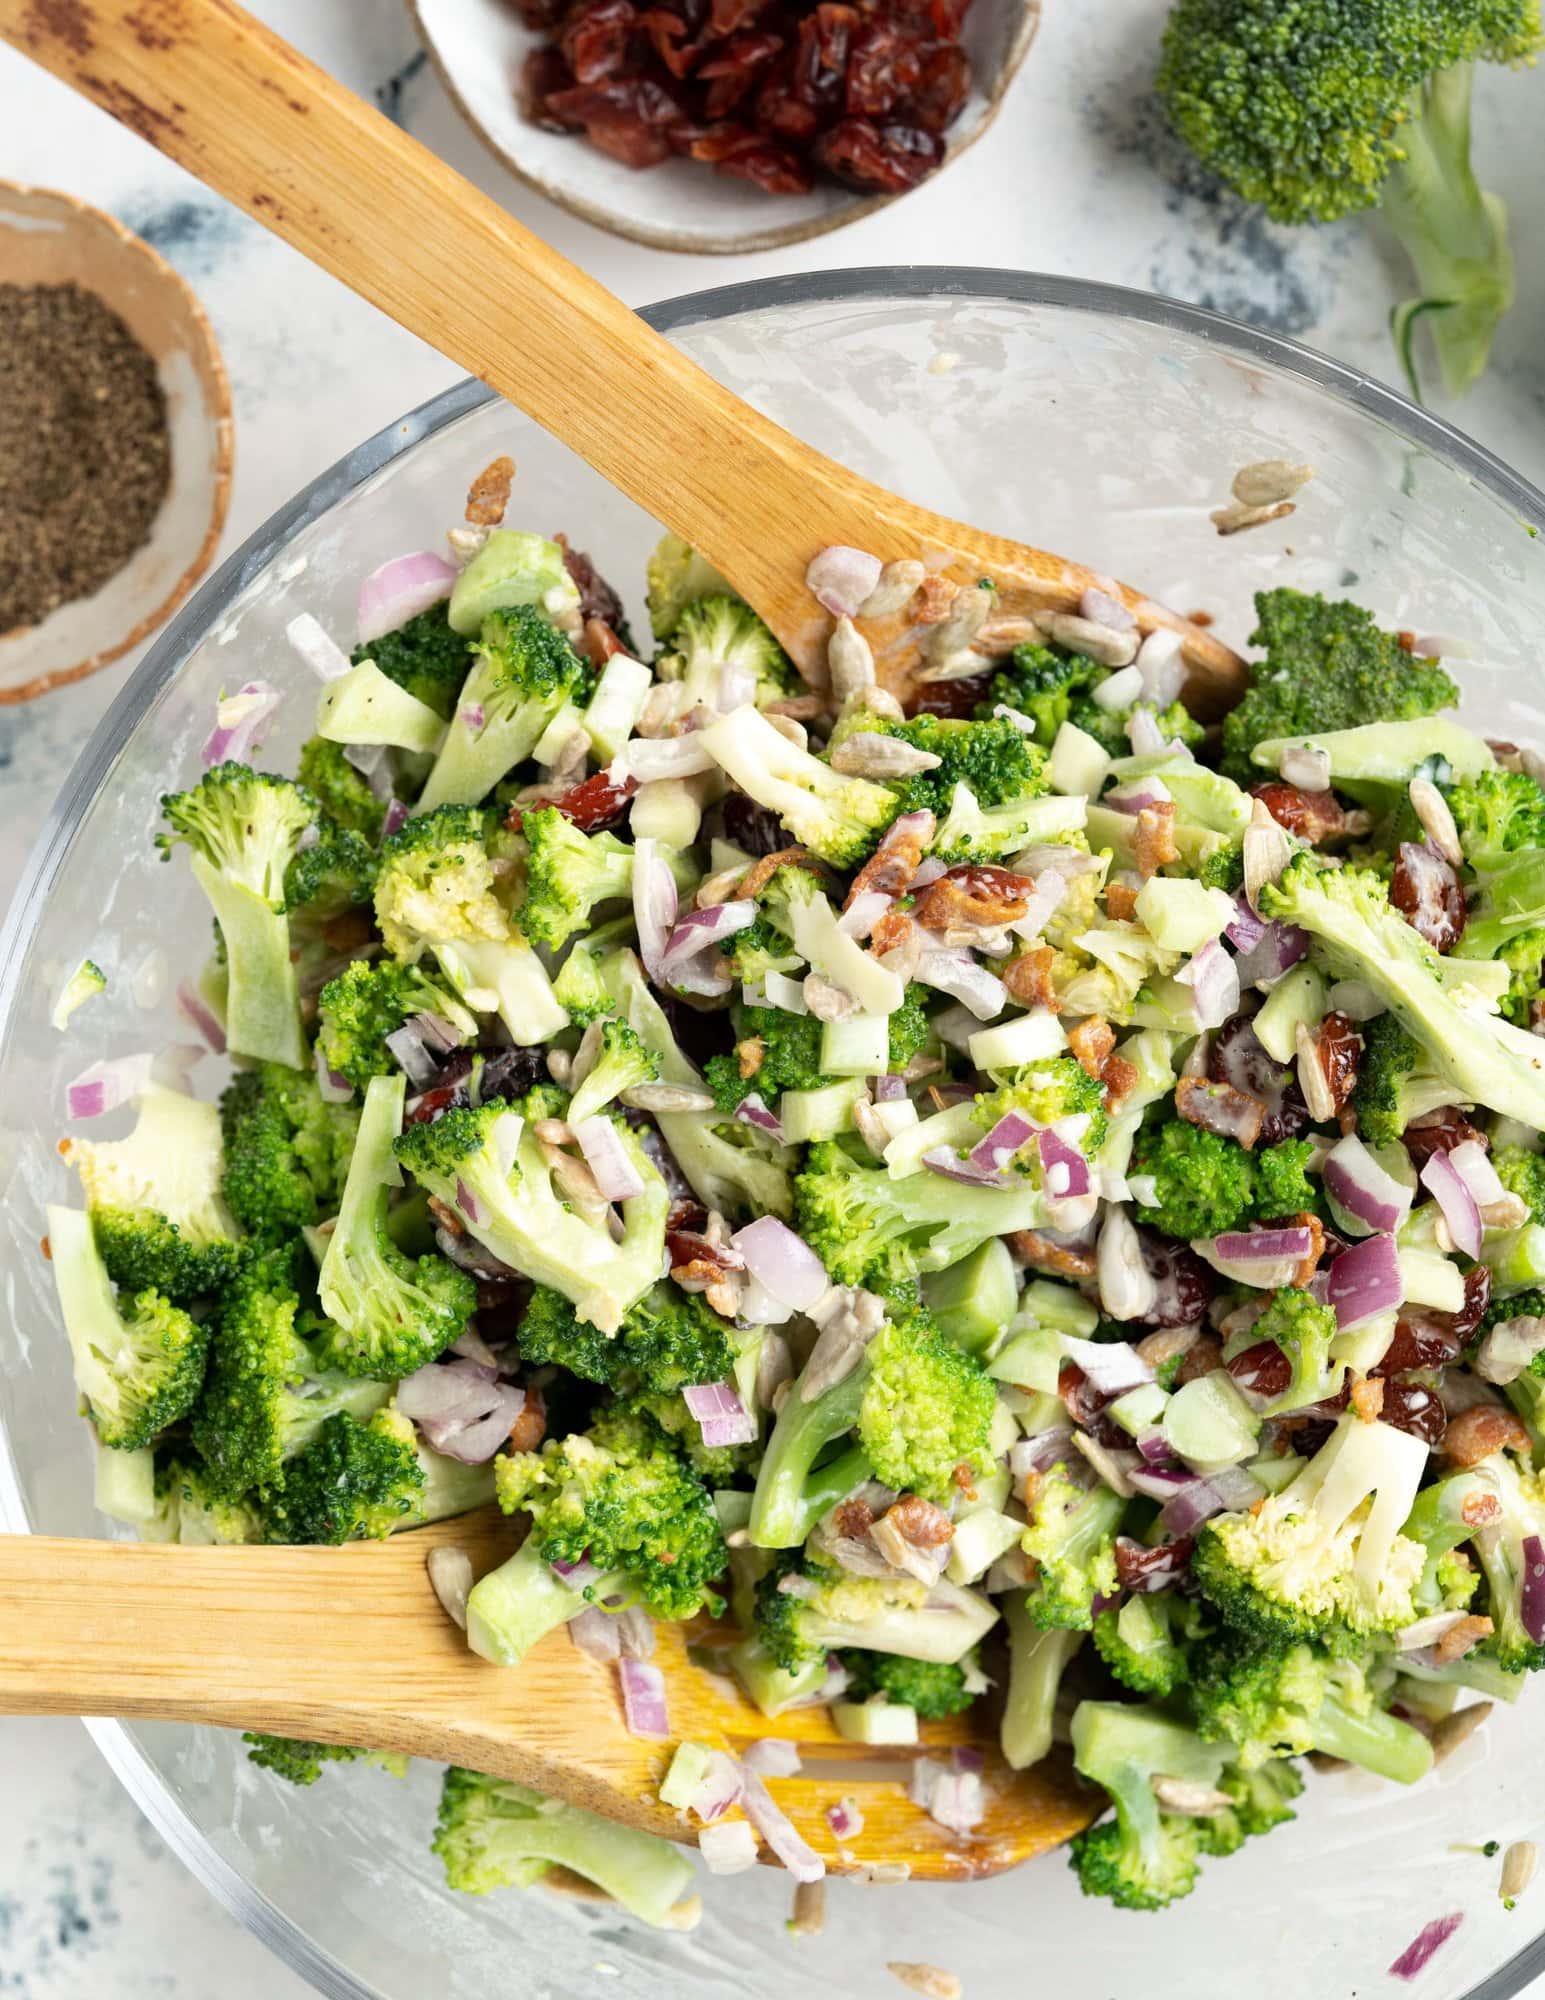 Fresh crisp broccoli, bits of onion and bacon, seeds and cranberry tossed in a creamy yogurt-based dressing, in a large mixing bowl with a wooden spatula.